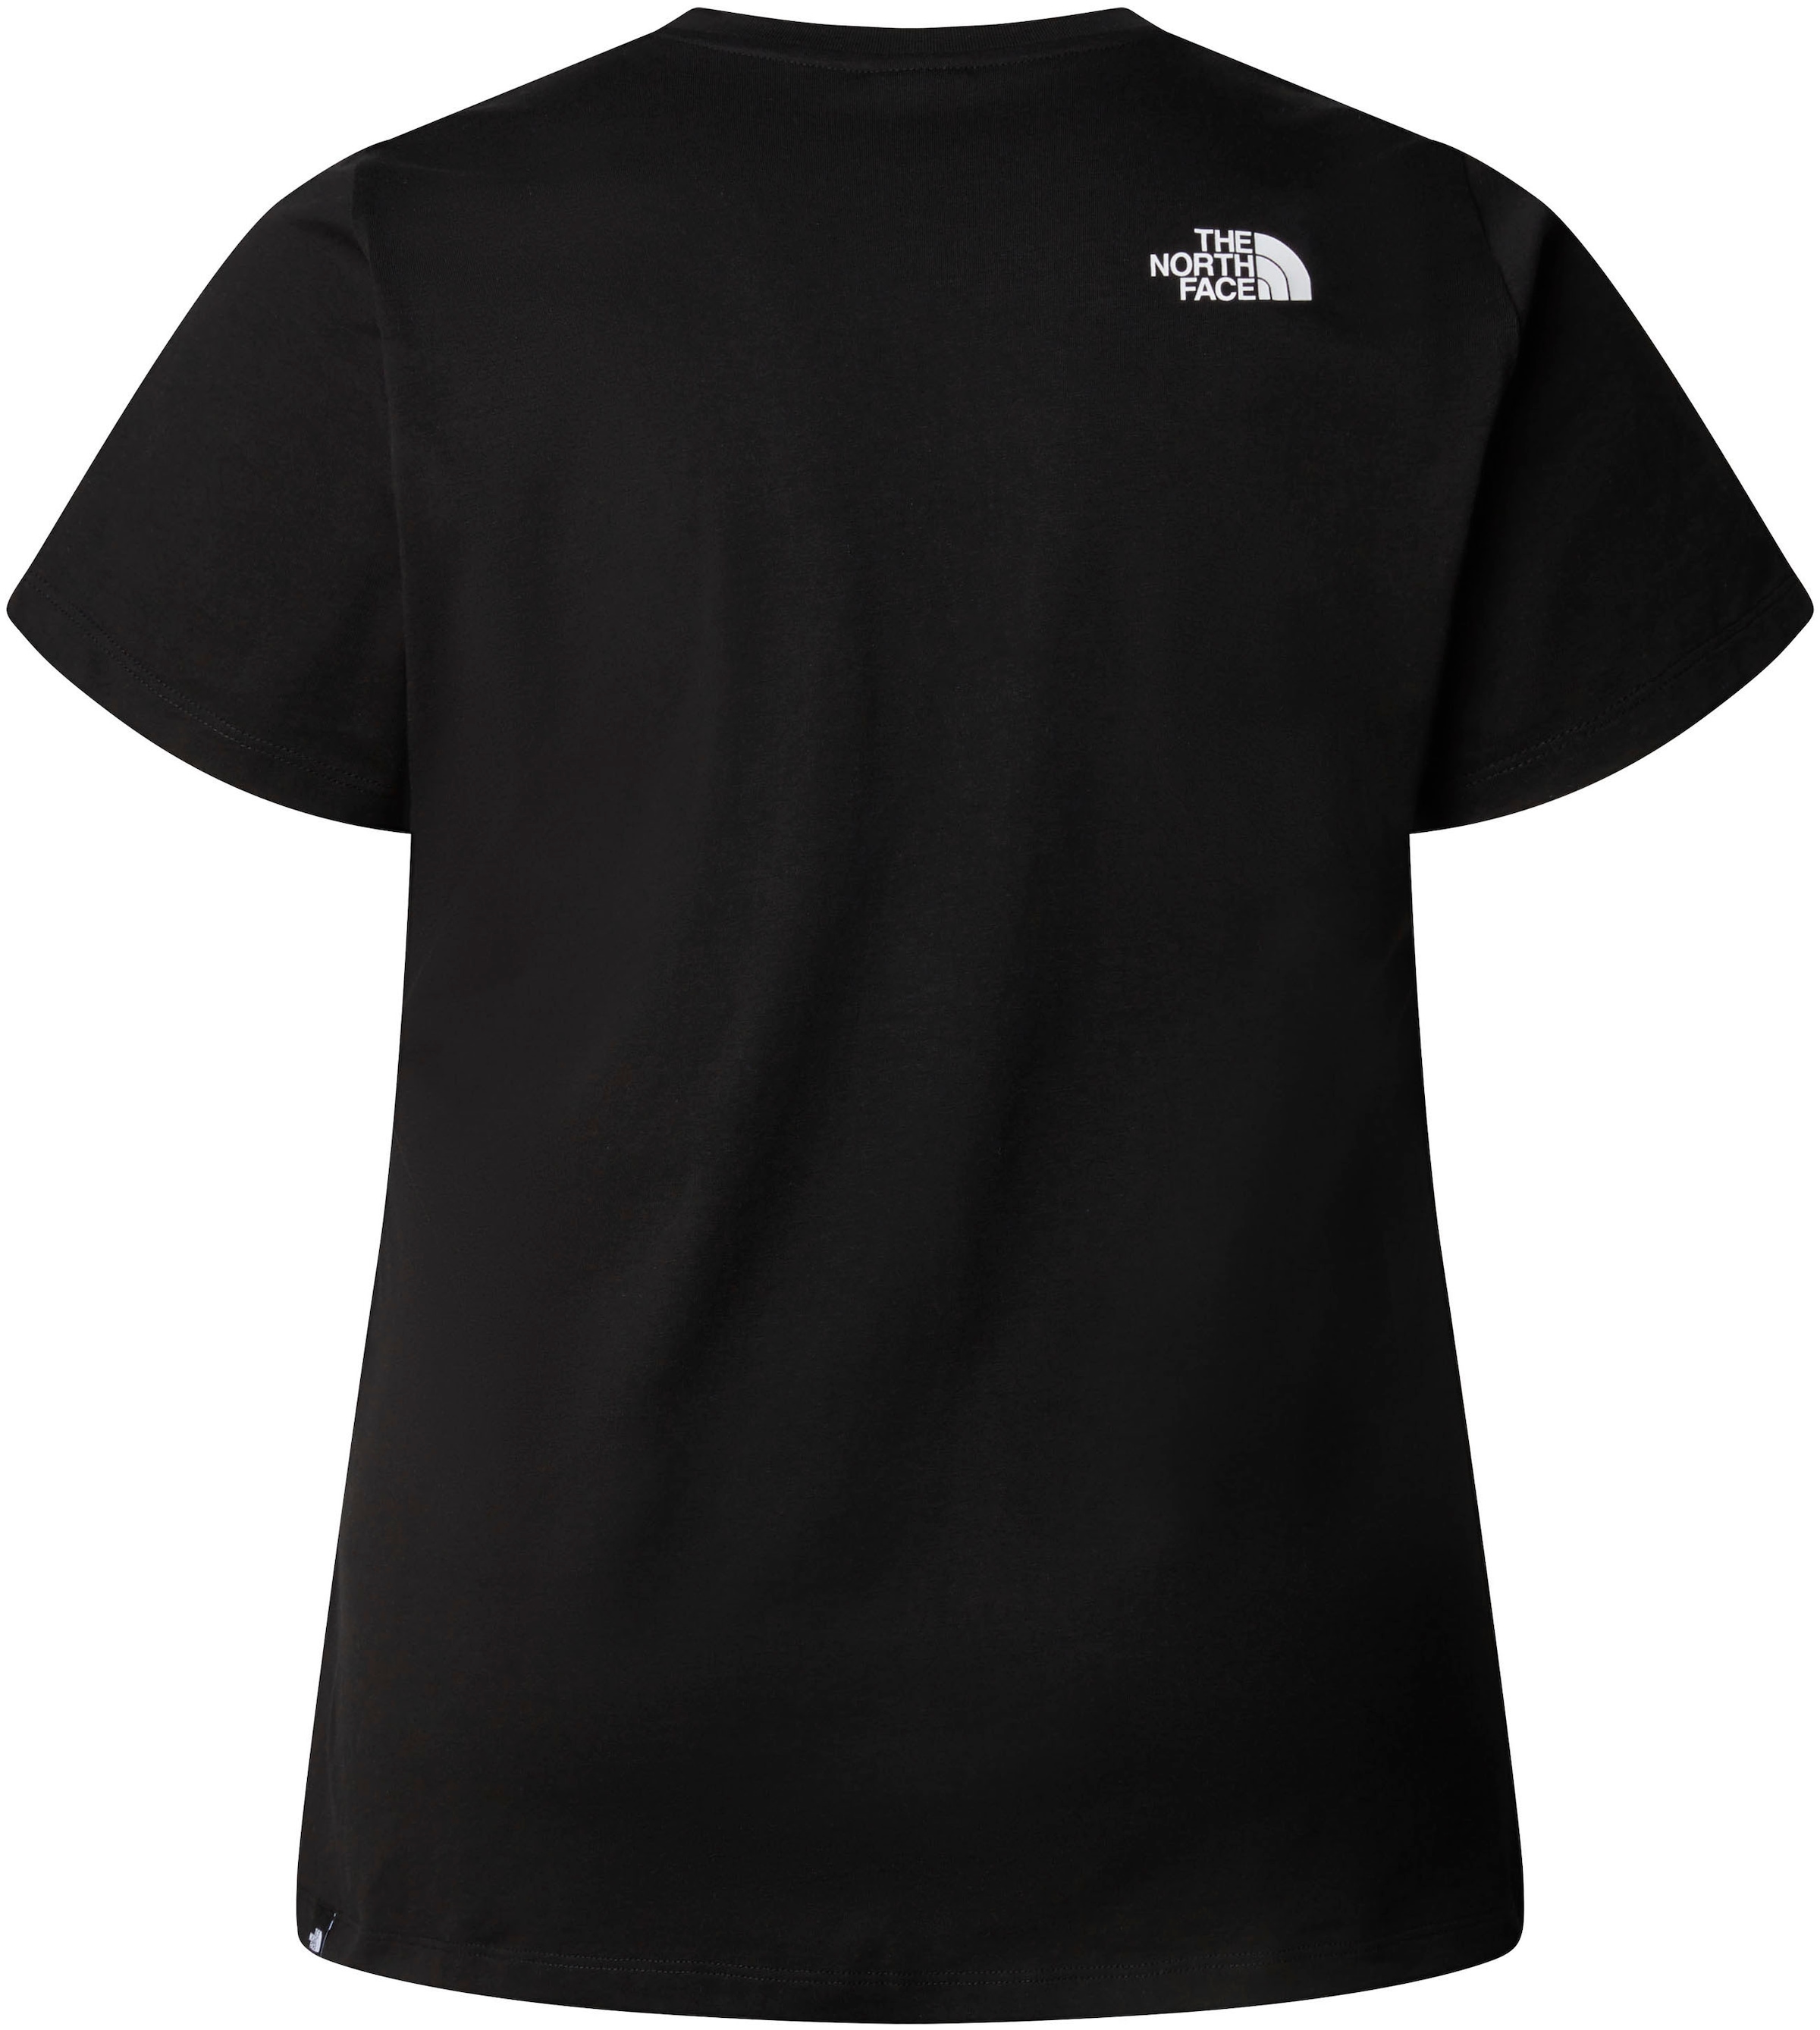 The North Face T-Shirt »W PLUS S/S SIMPLE DOME TEE«, in großen Größen